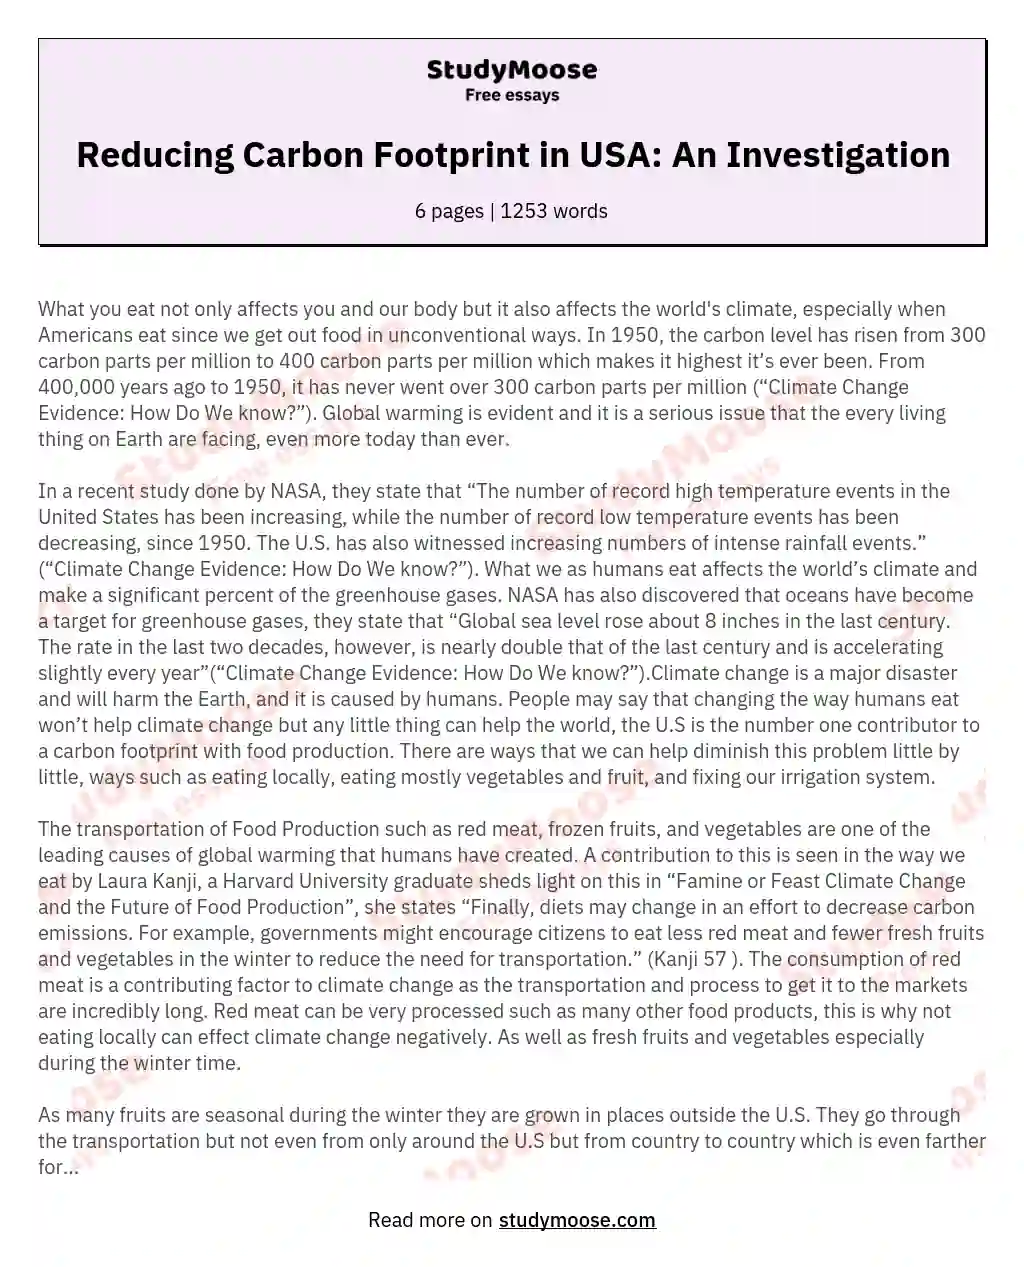 Reducing Carbon Footprint in USA: An Investigation essay